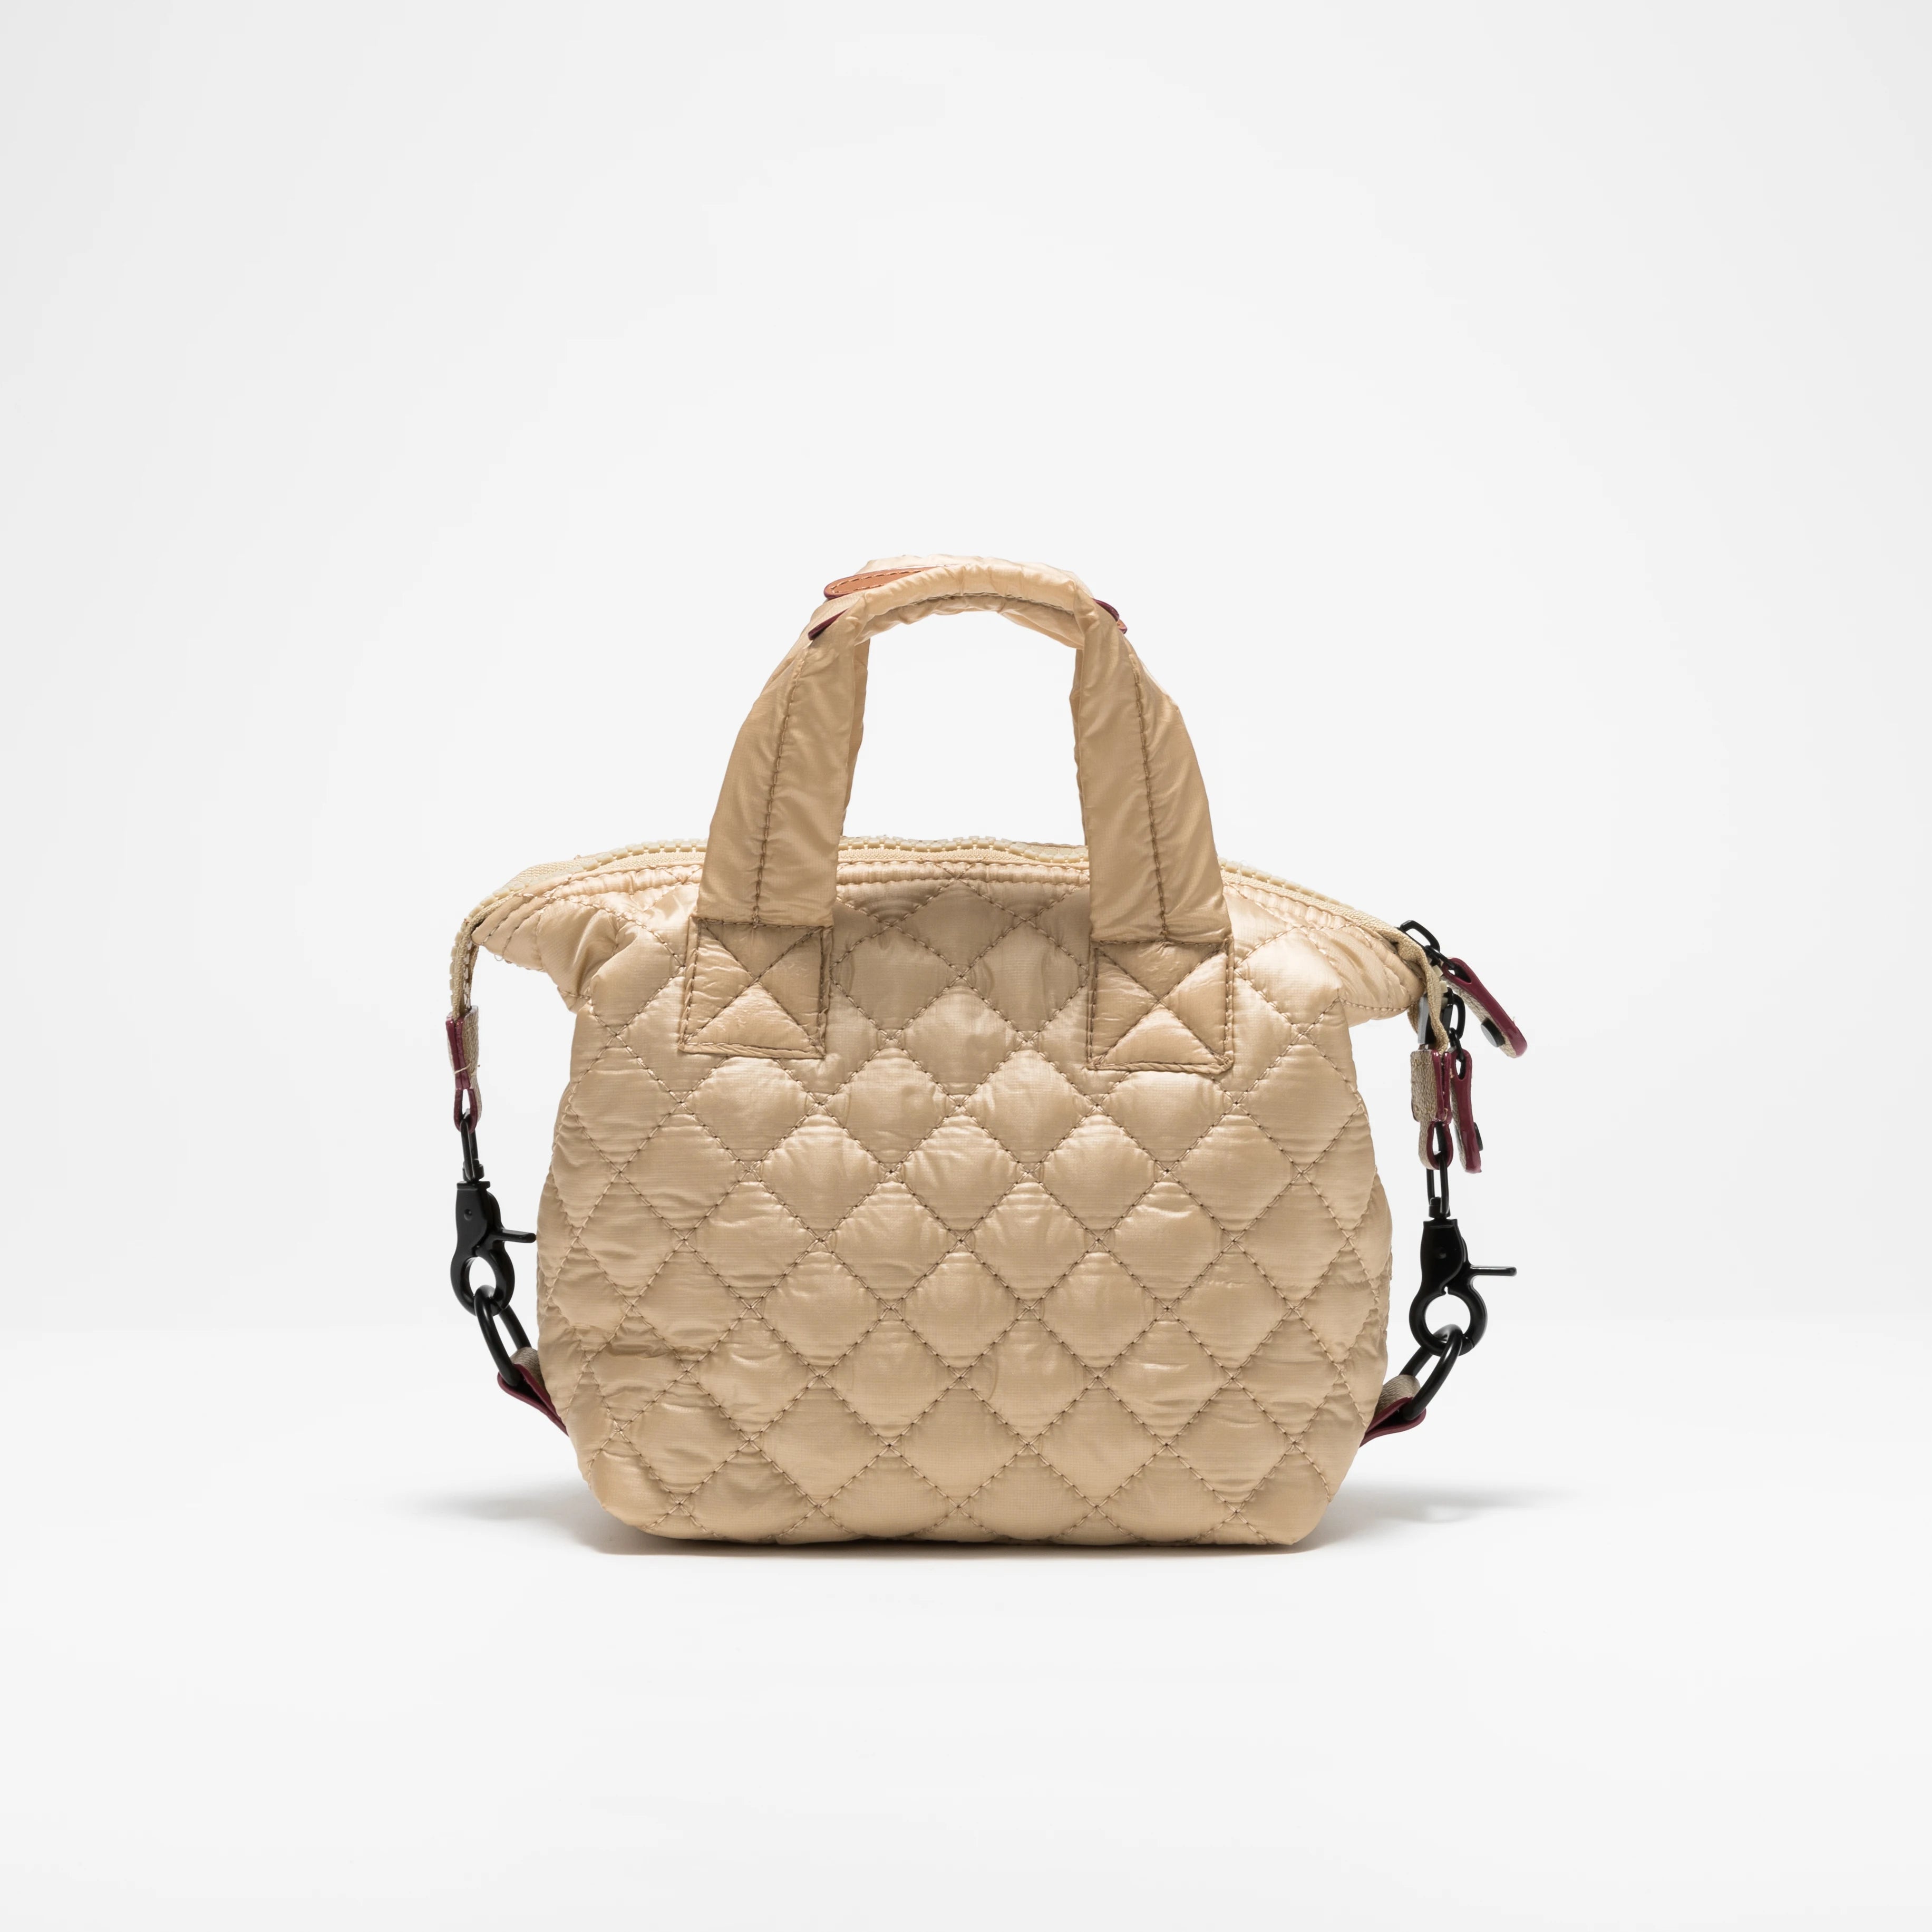 Down Padded Quilted Shoulder Tote Handbags